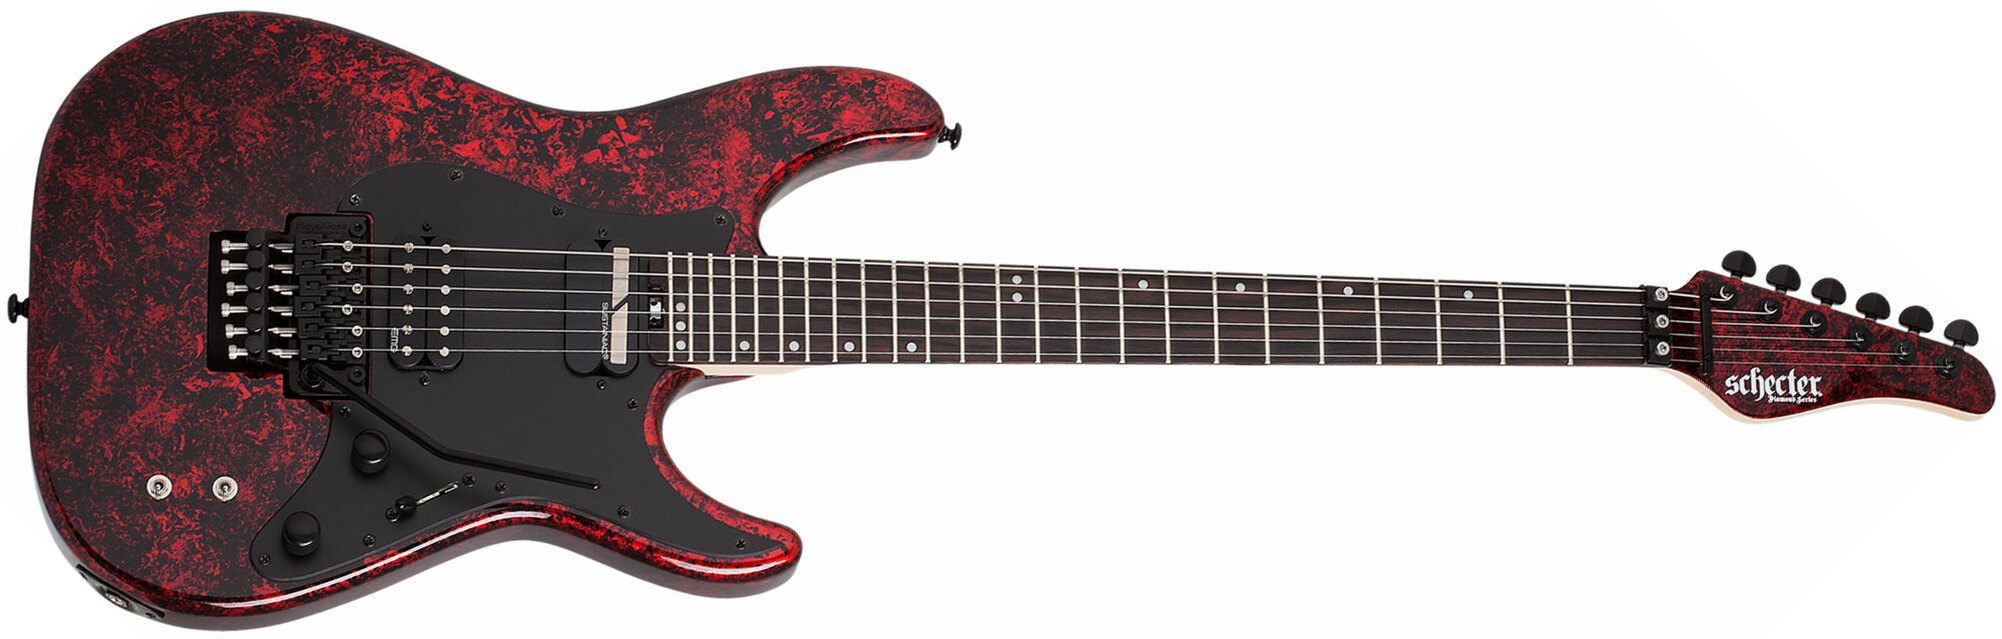 Schecter Sun Valley Super Shredder Fr S 2h Emg Sustainiac Eb - Red Reign - Metal electric guitar - Main picture